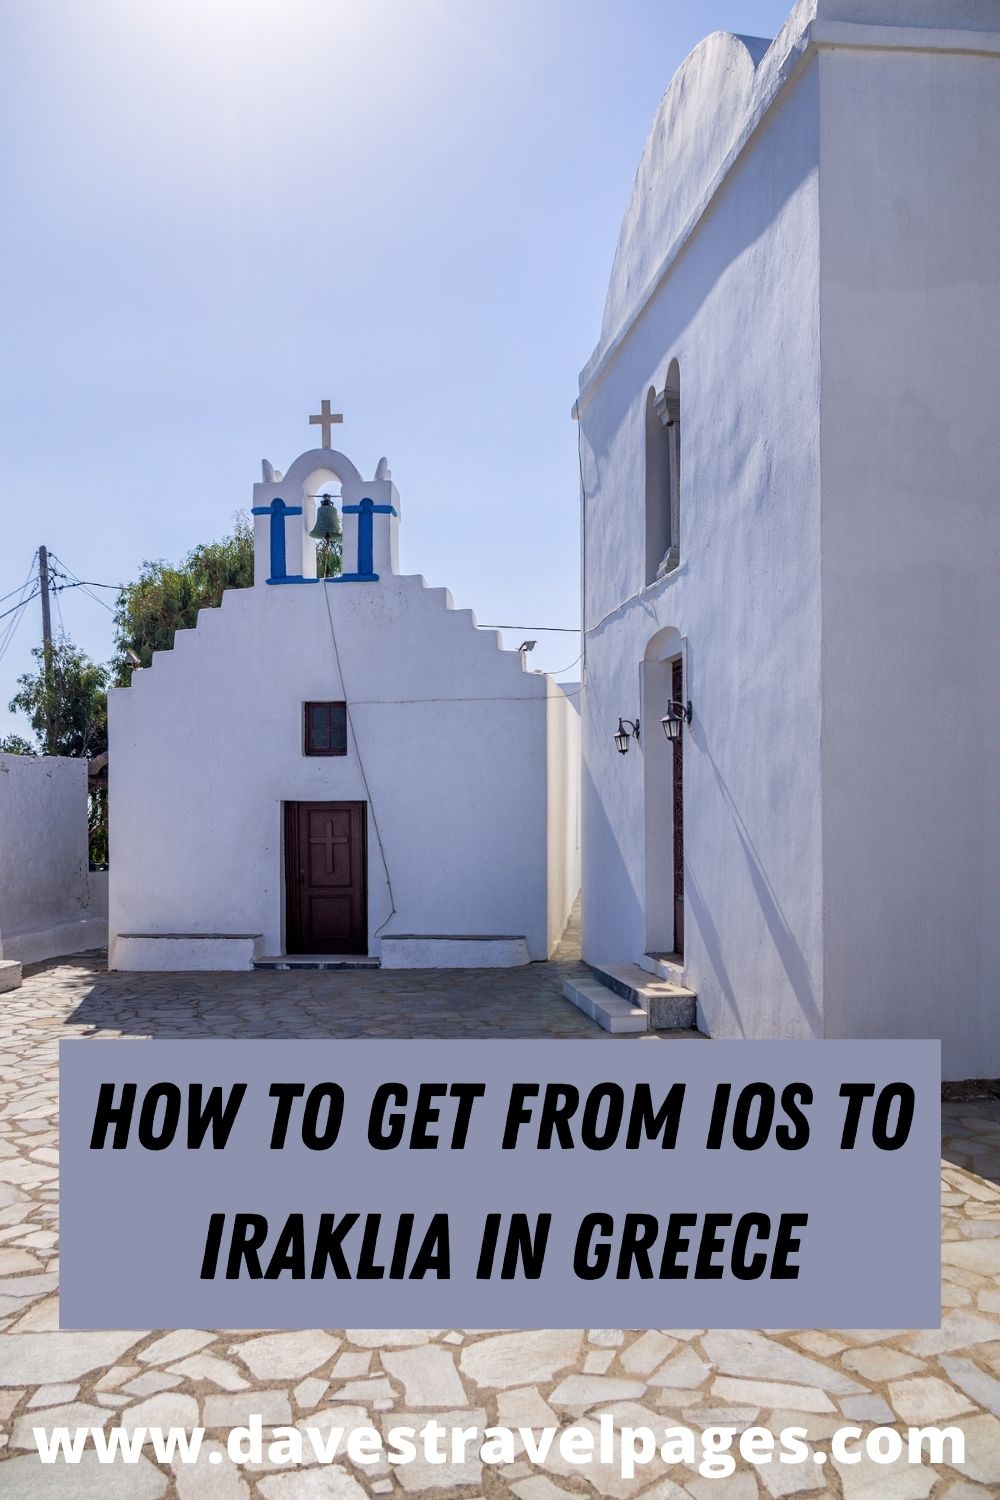 Best way to get from Ios to Iraklia in Greece